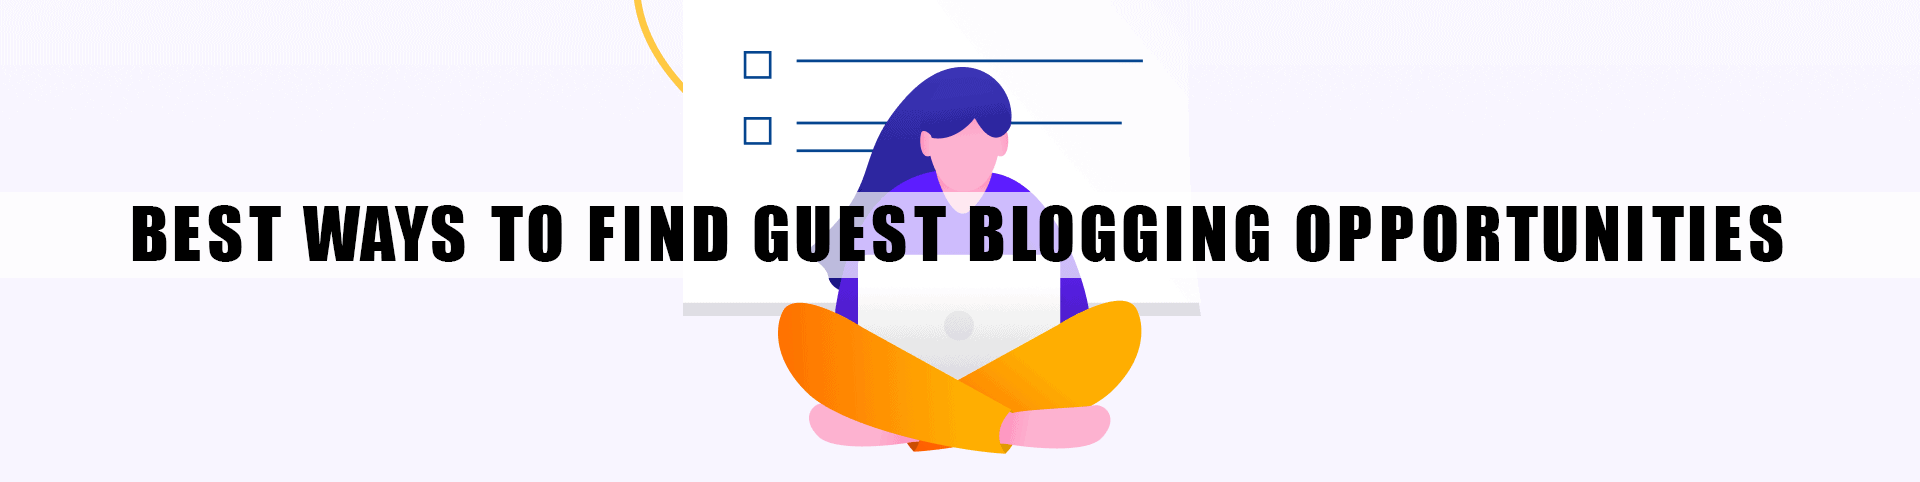 Best Ways to Find Guest Blogging and guest posting Opportunities